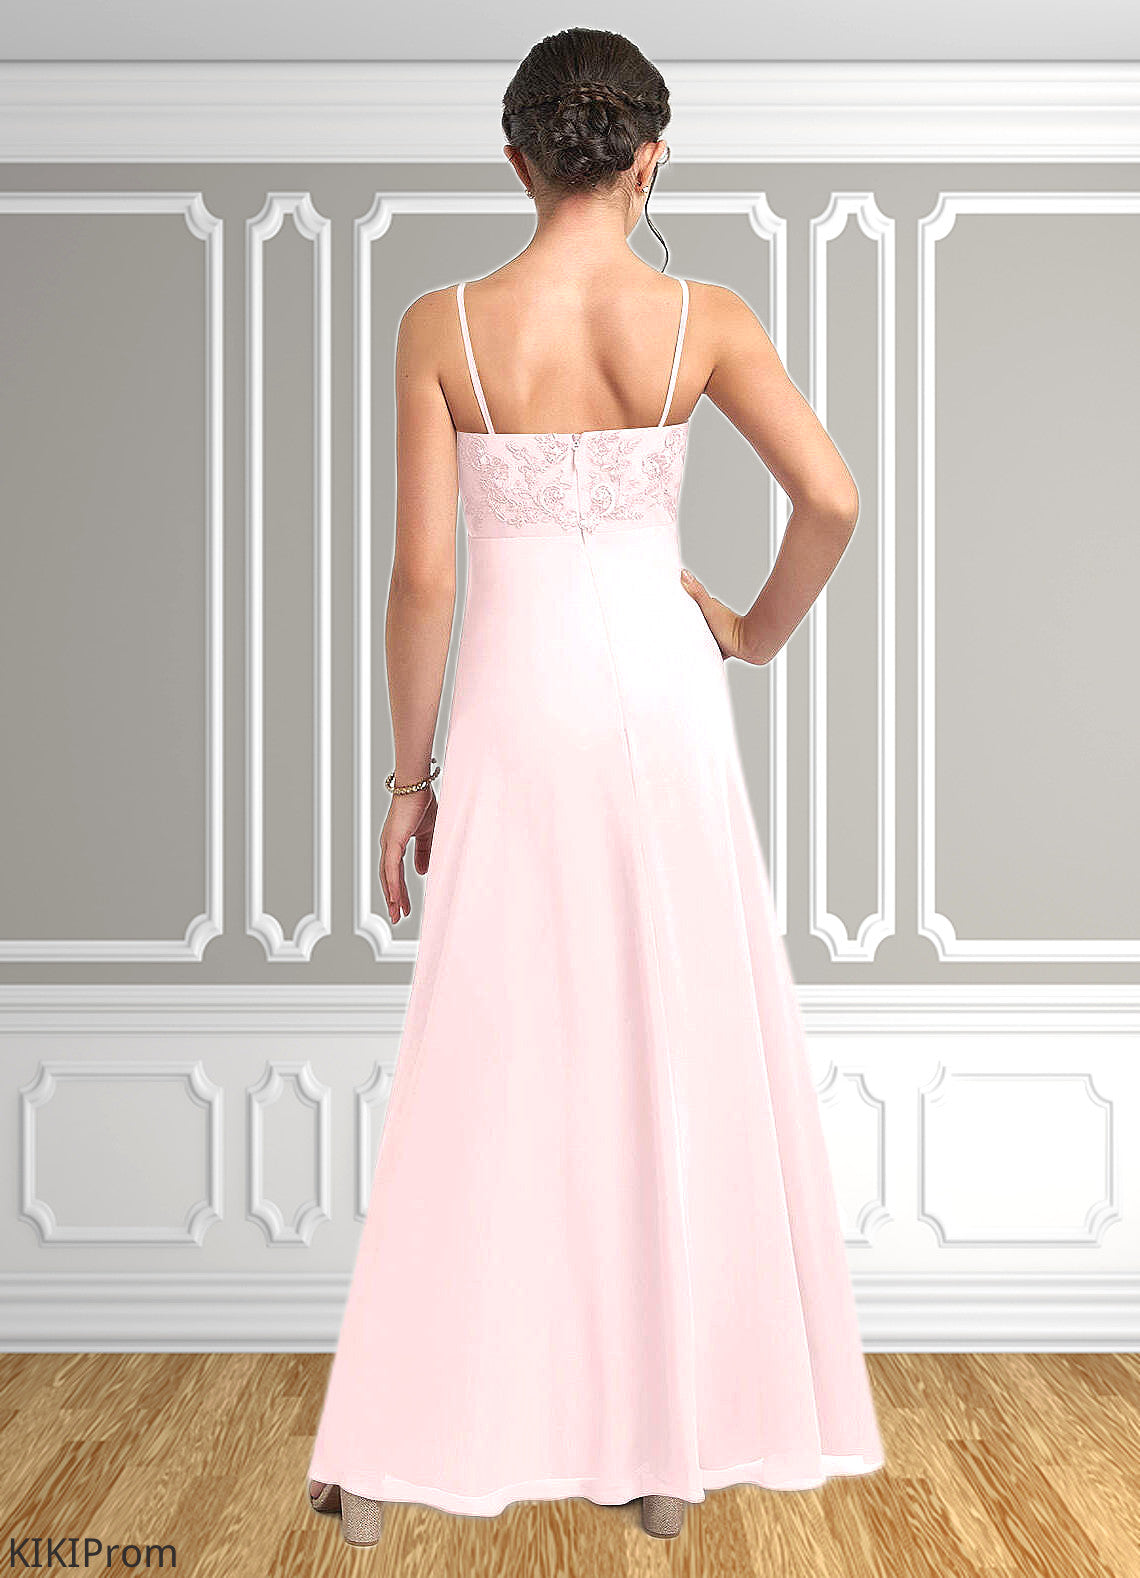 Marely A-Line Lace Chiffon Floor-Length Junior Bridesmaid Dress Blushing Pink DZP0022853